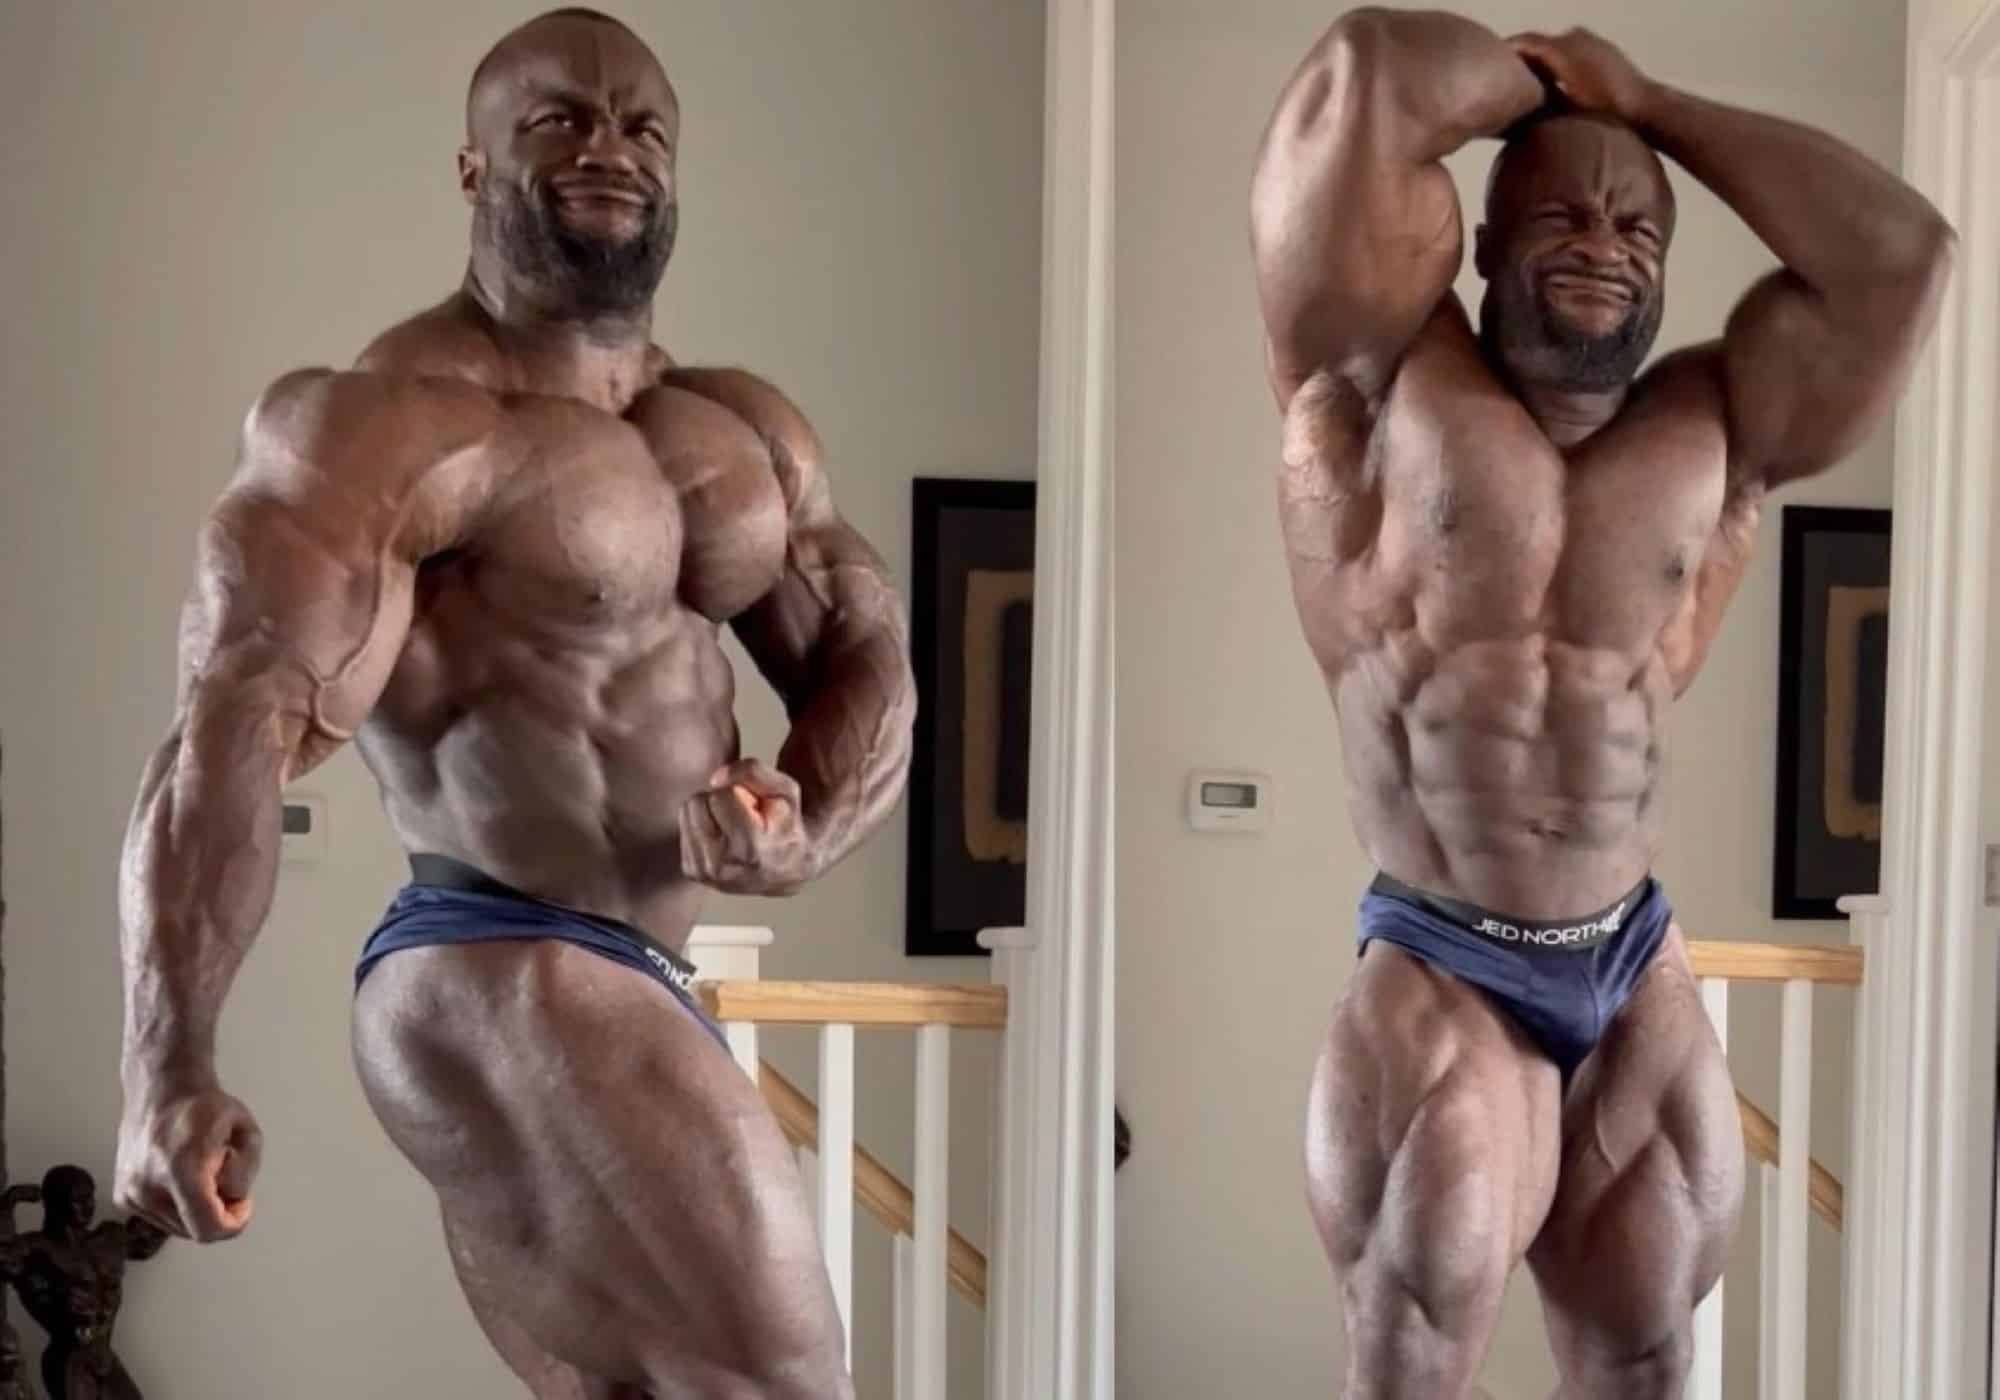 Wil Men's Open Bodybuilding Fall Behind The Newer Divisions?